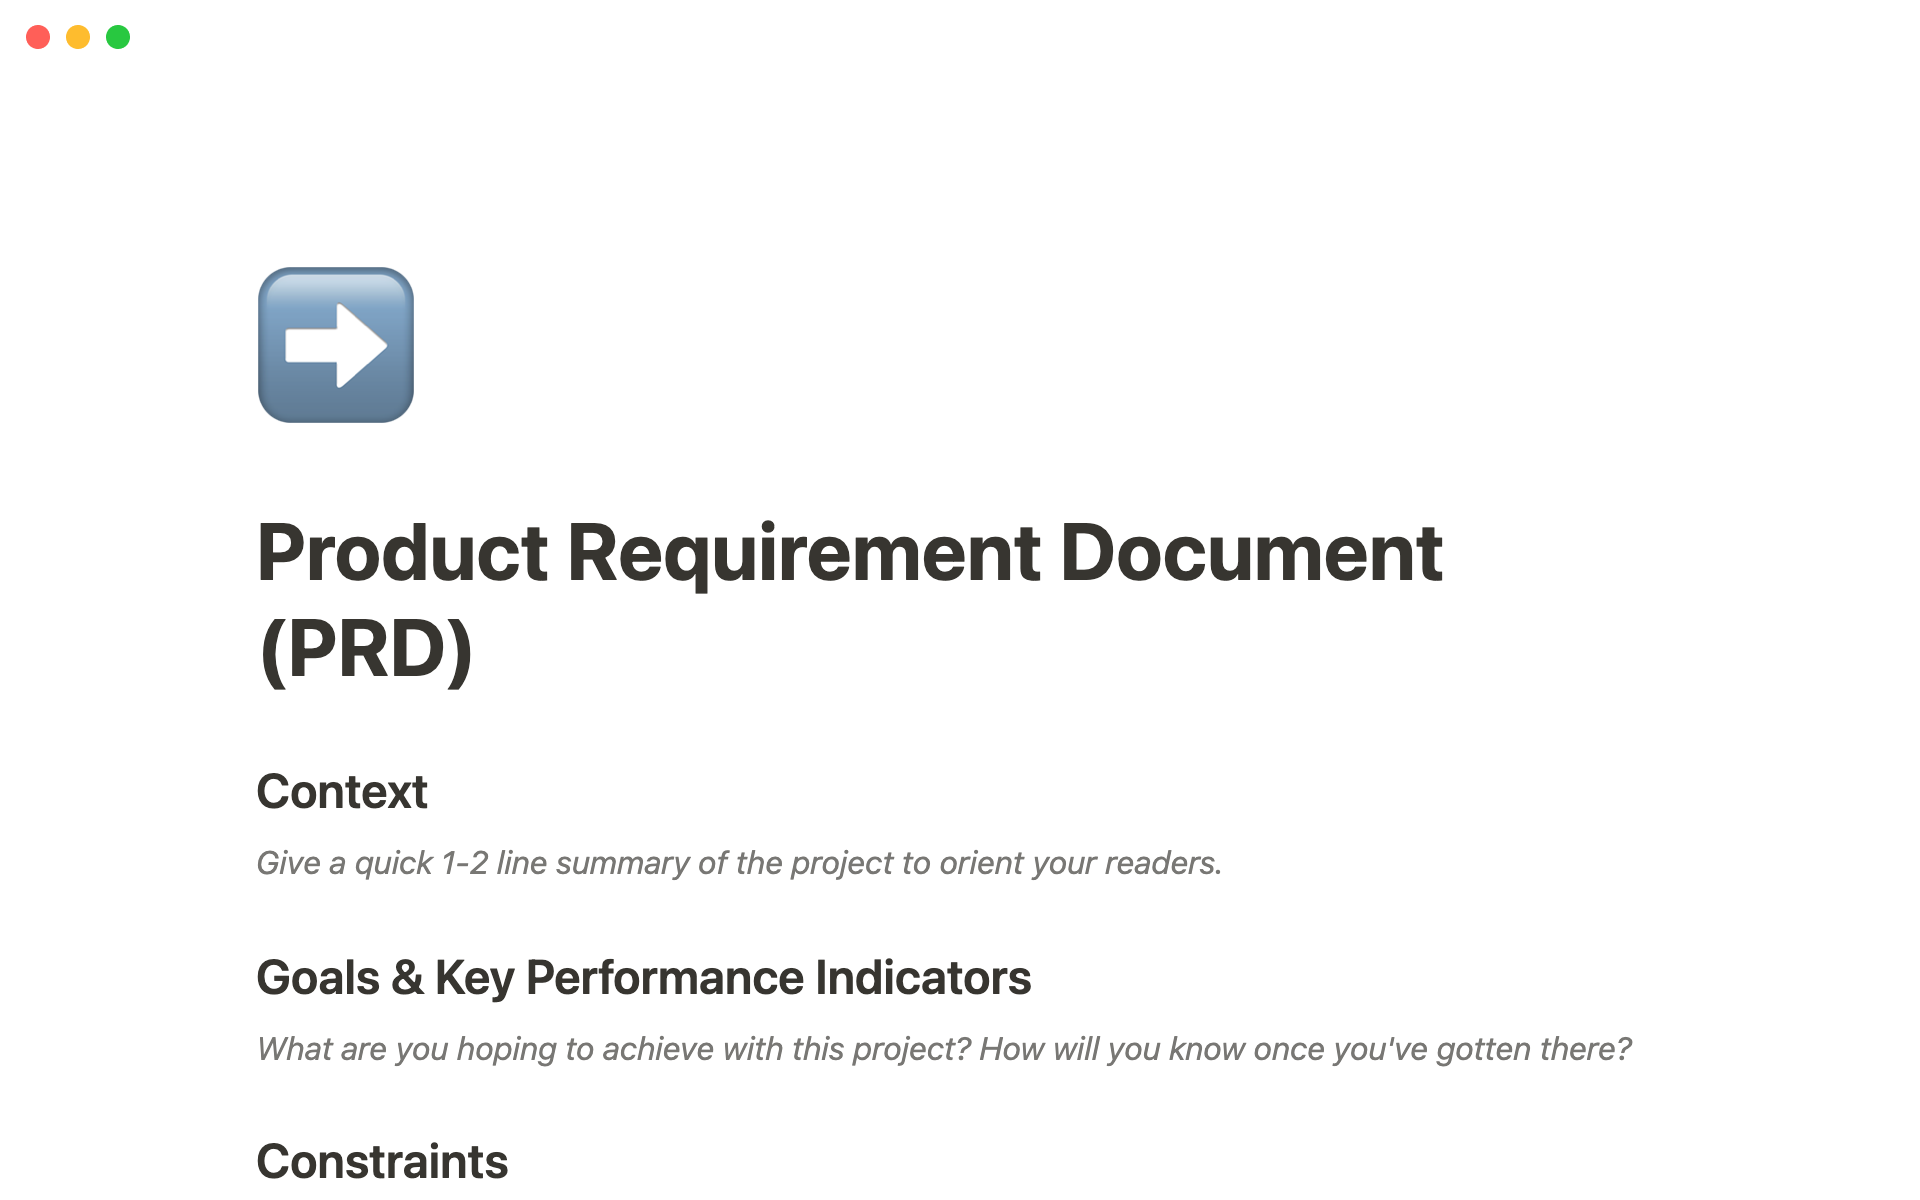 The desktop image for the Product requirement document (PRD) template